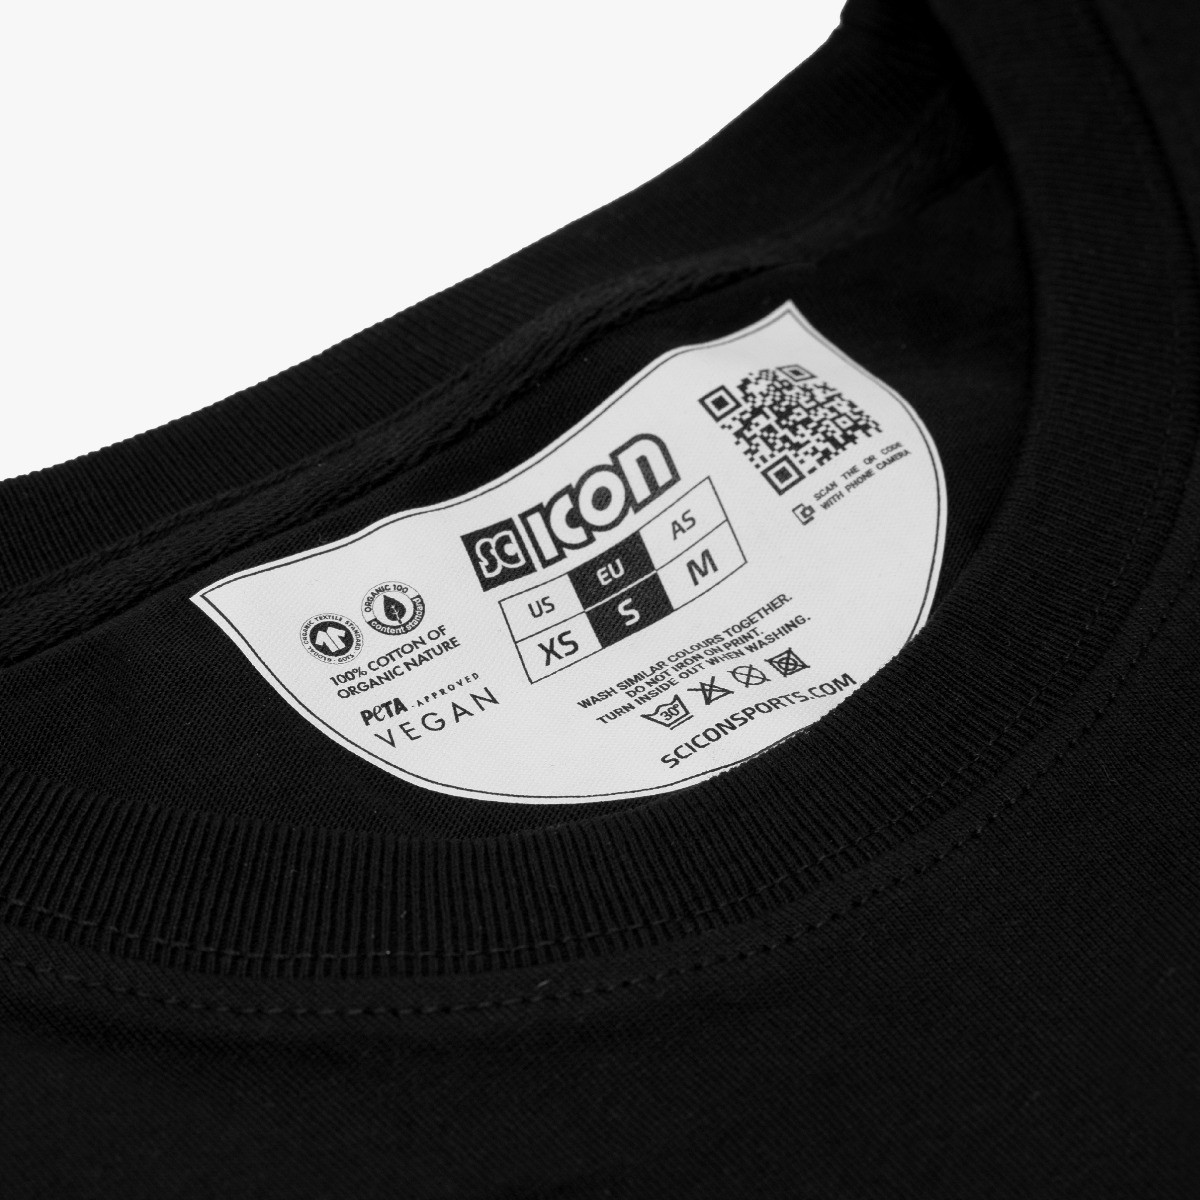 sciconsports t-shirt black ts61882
